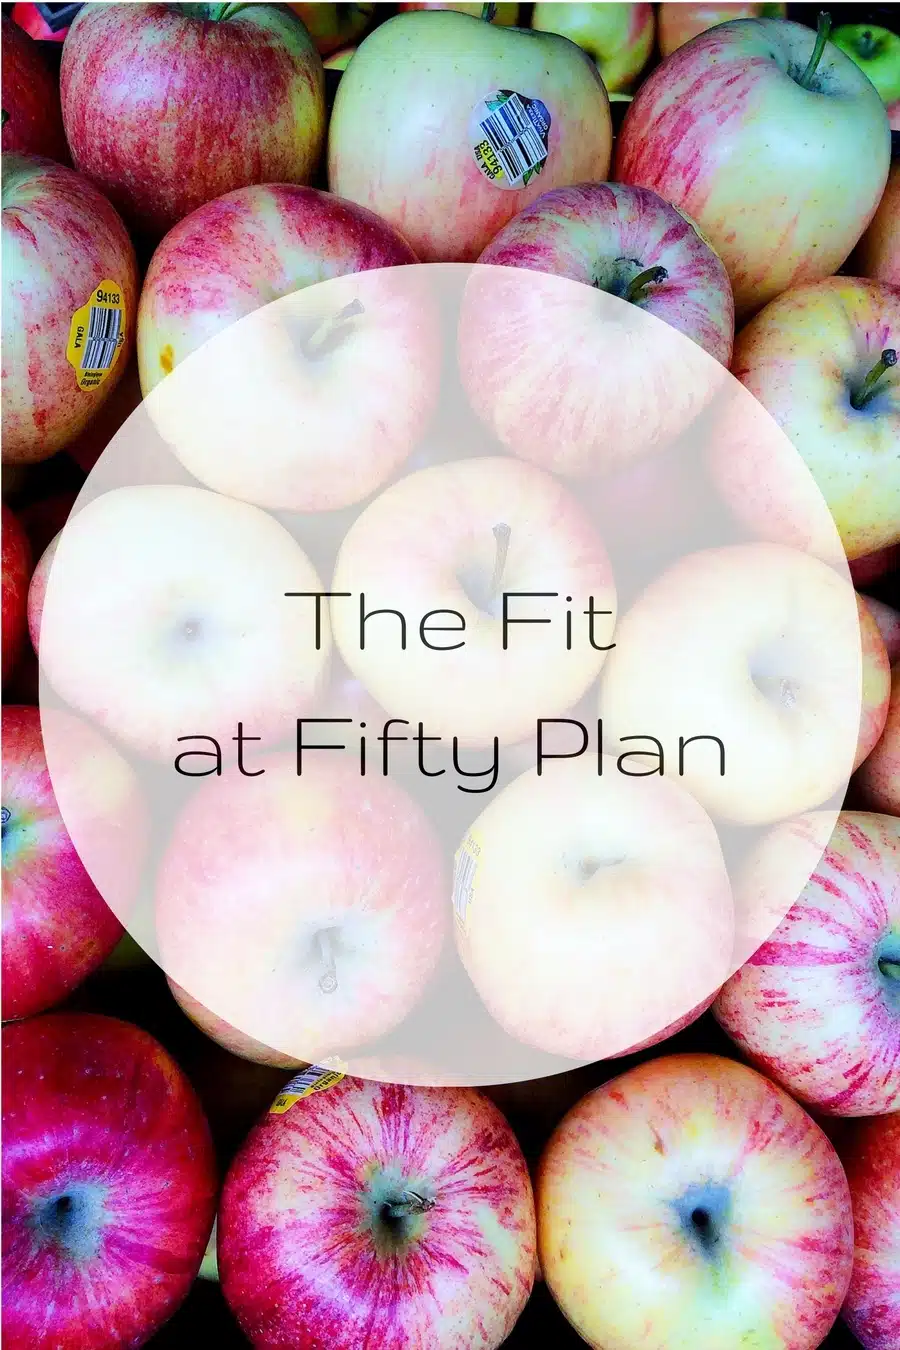 The Fit at Fifty Plan